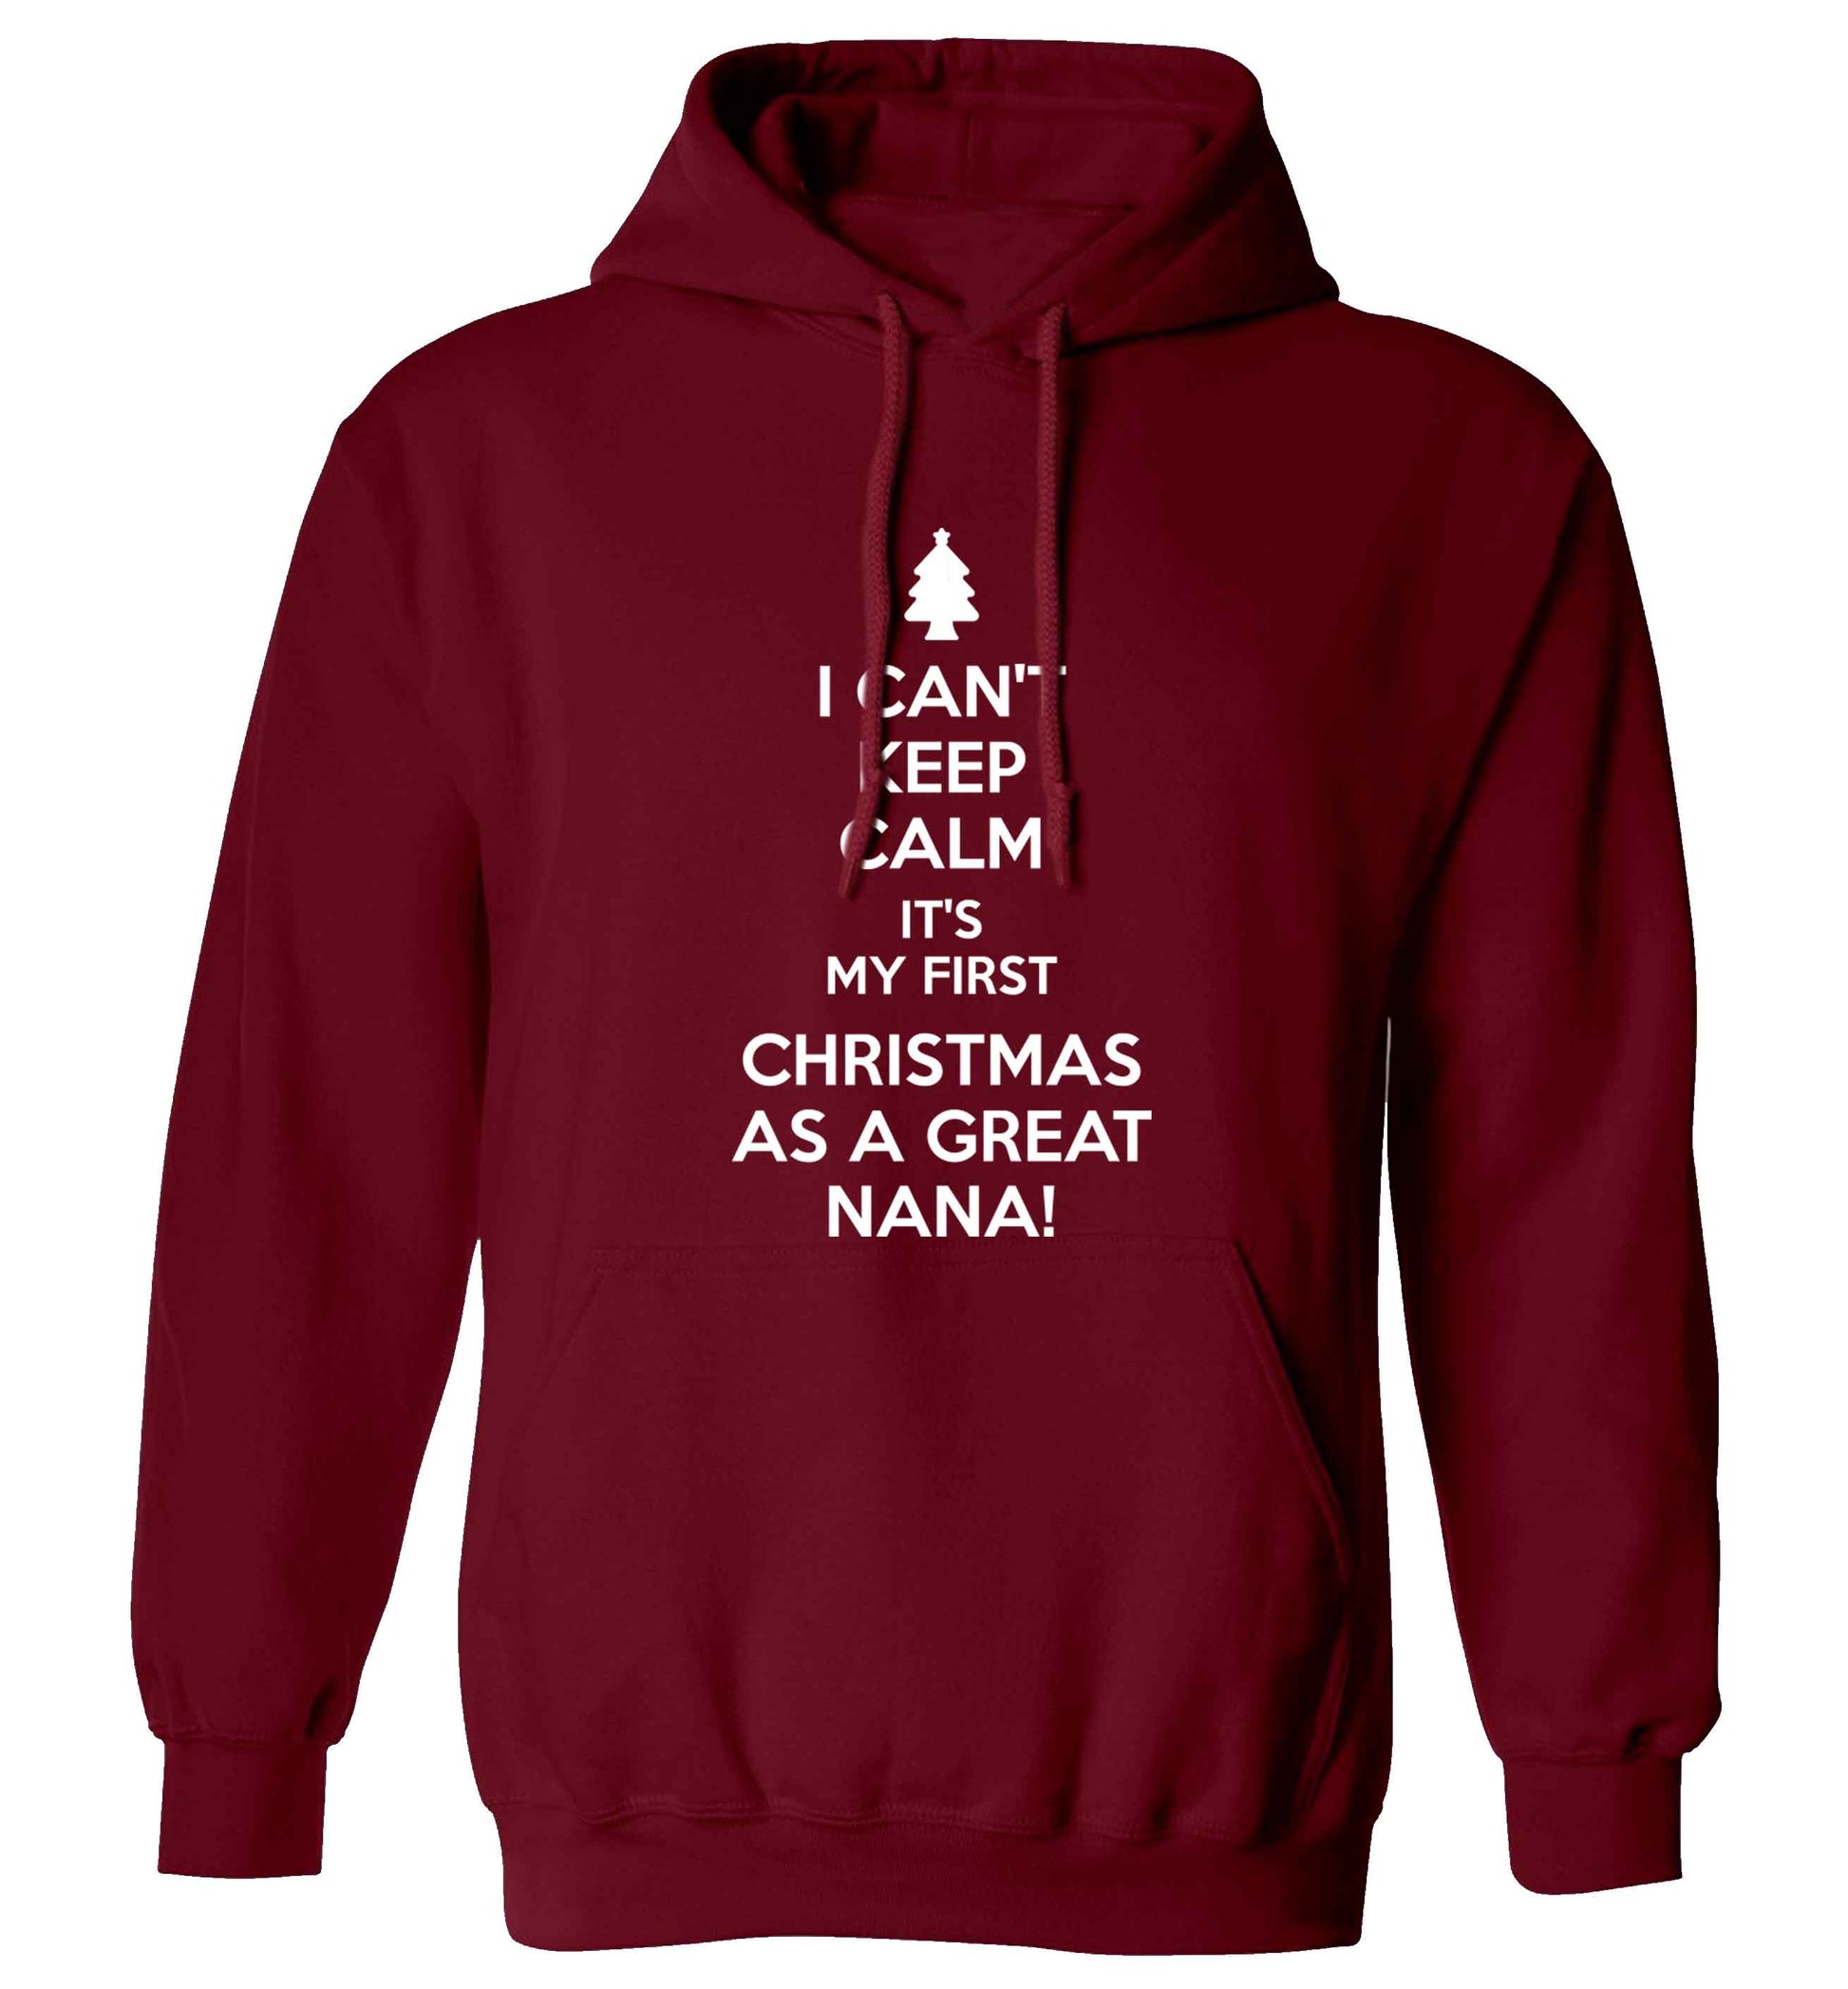 I can't keep calm it's my first Christmas as a great nana! adults unisex maroon hoodie 2XL